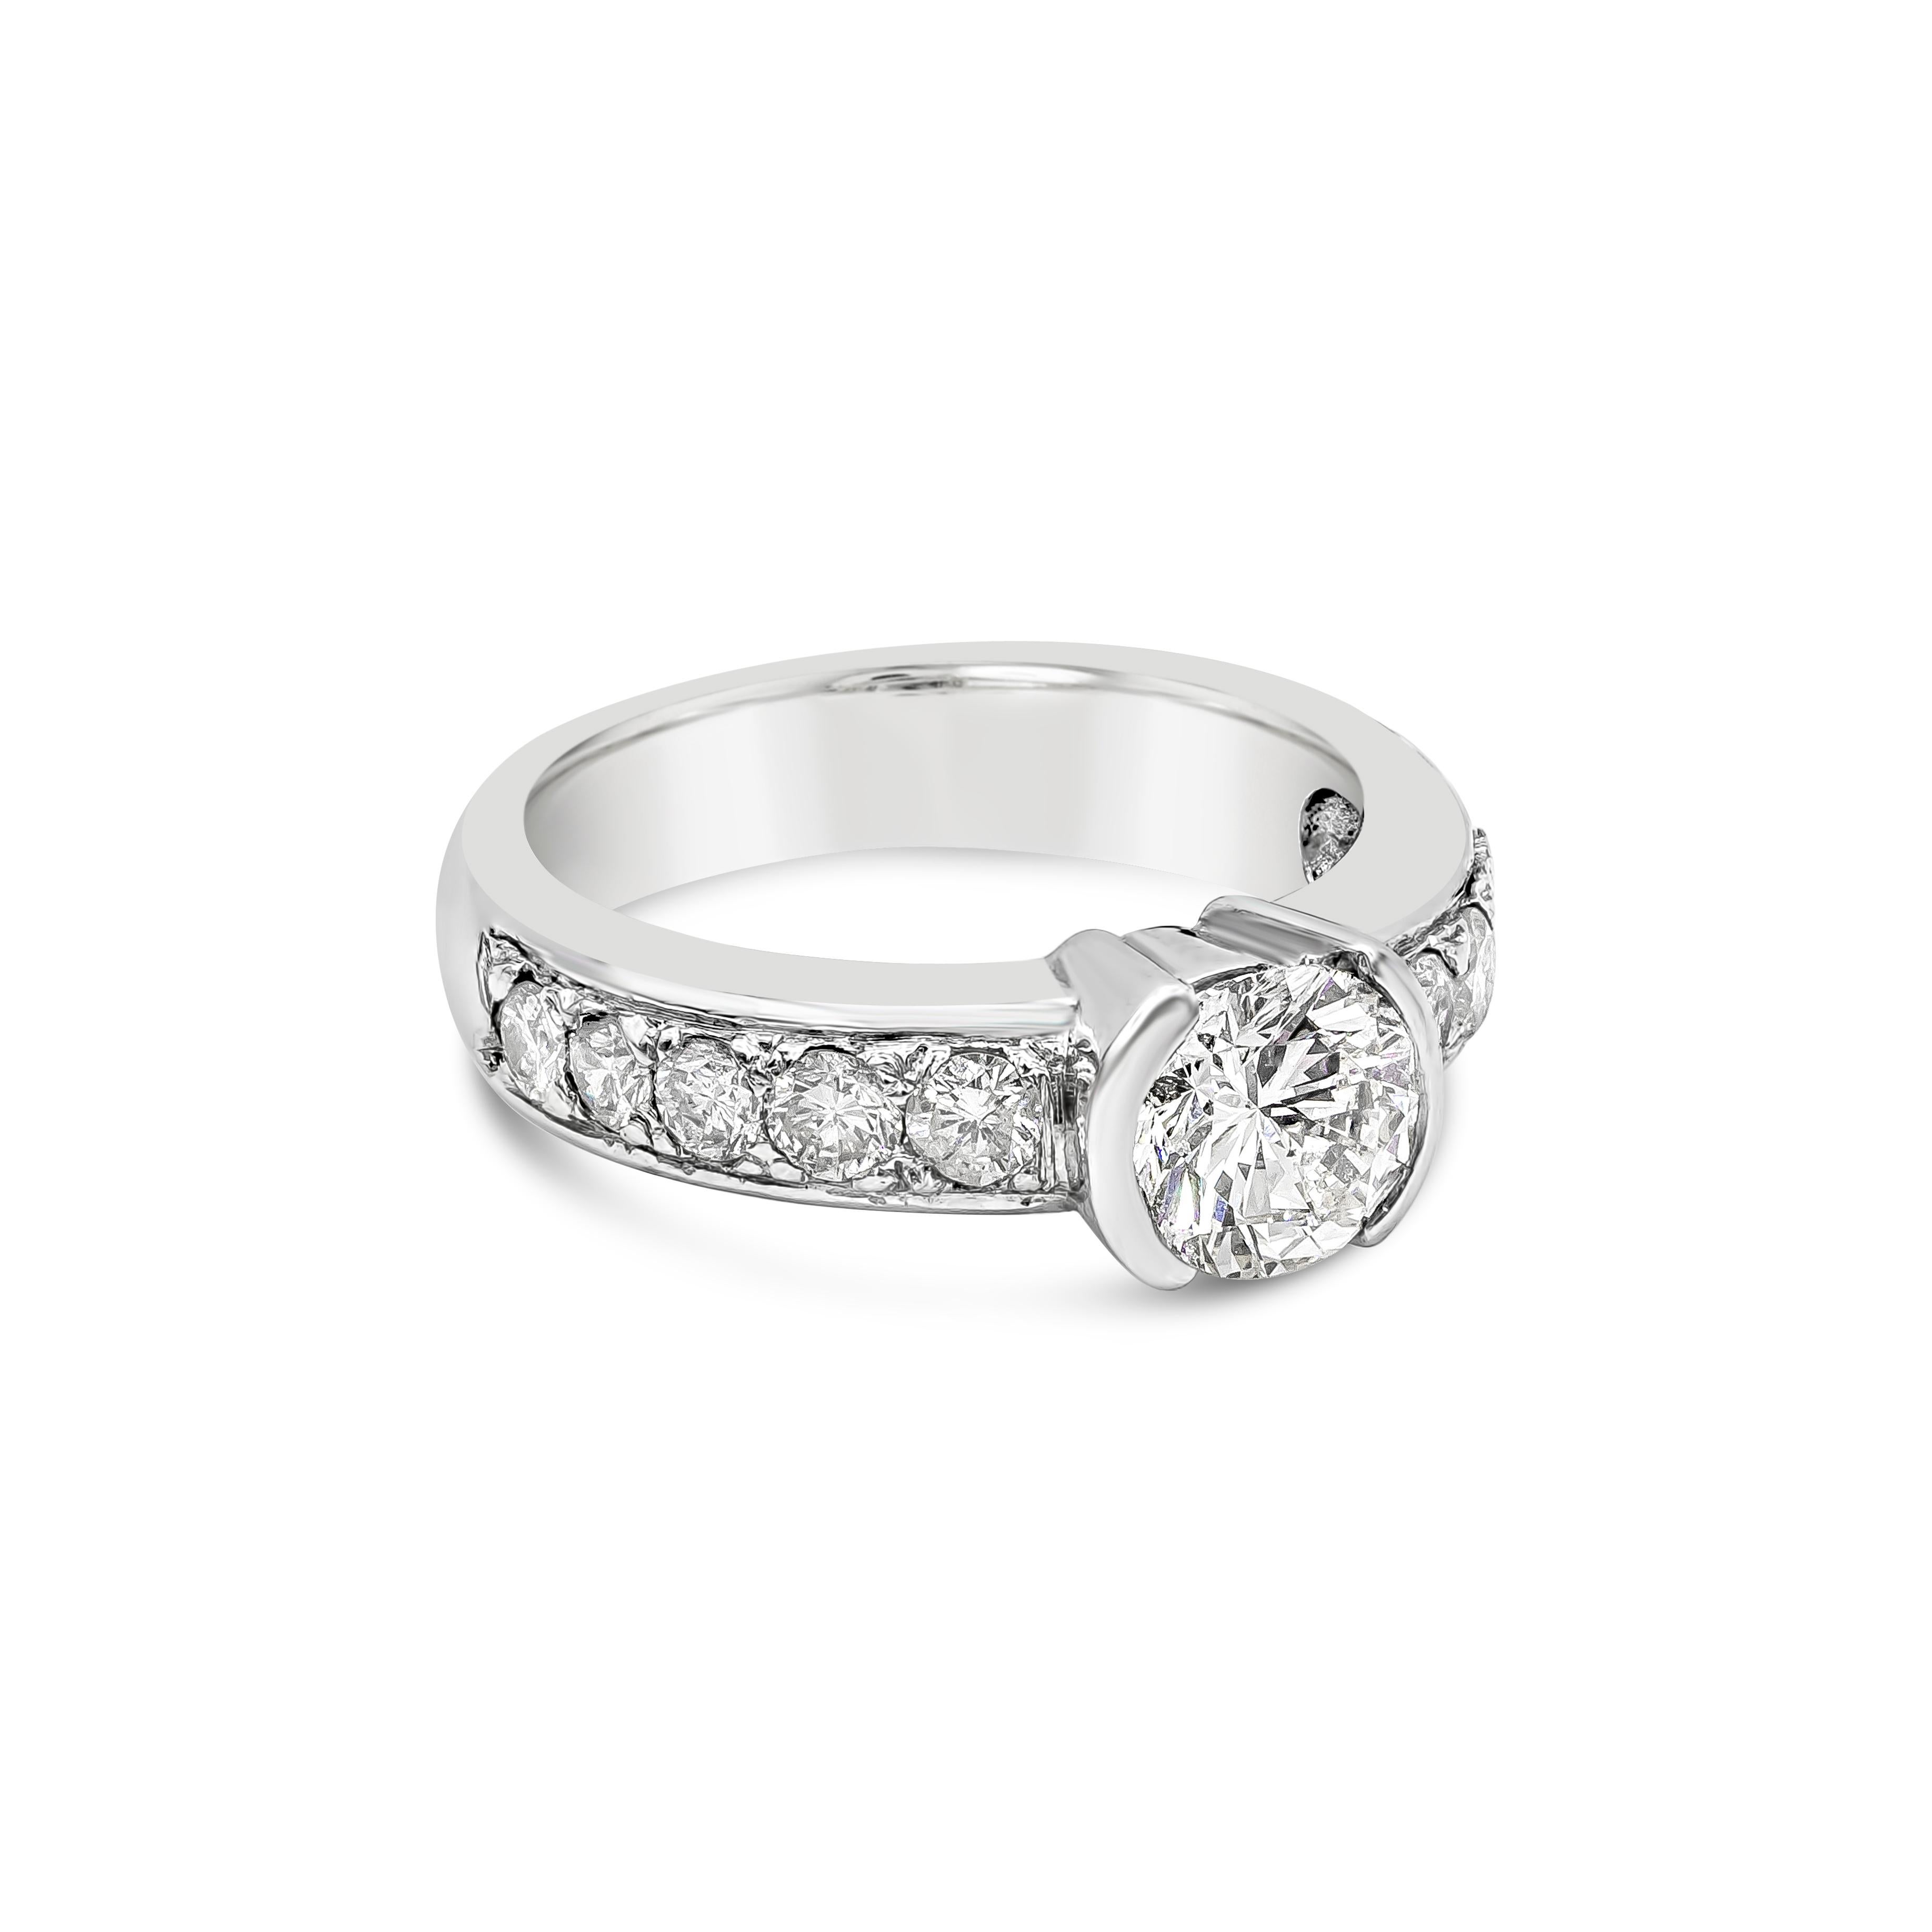 This gorgeous ring has a beautiful unique half bezel design with a 1.01 carat brilliant round diamond. The center stone is accented with a single row of brilliant round diamonds that set on each side of the ring which weighs about 0.51 carats in